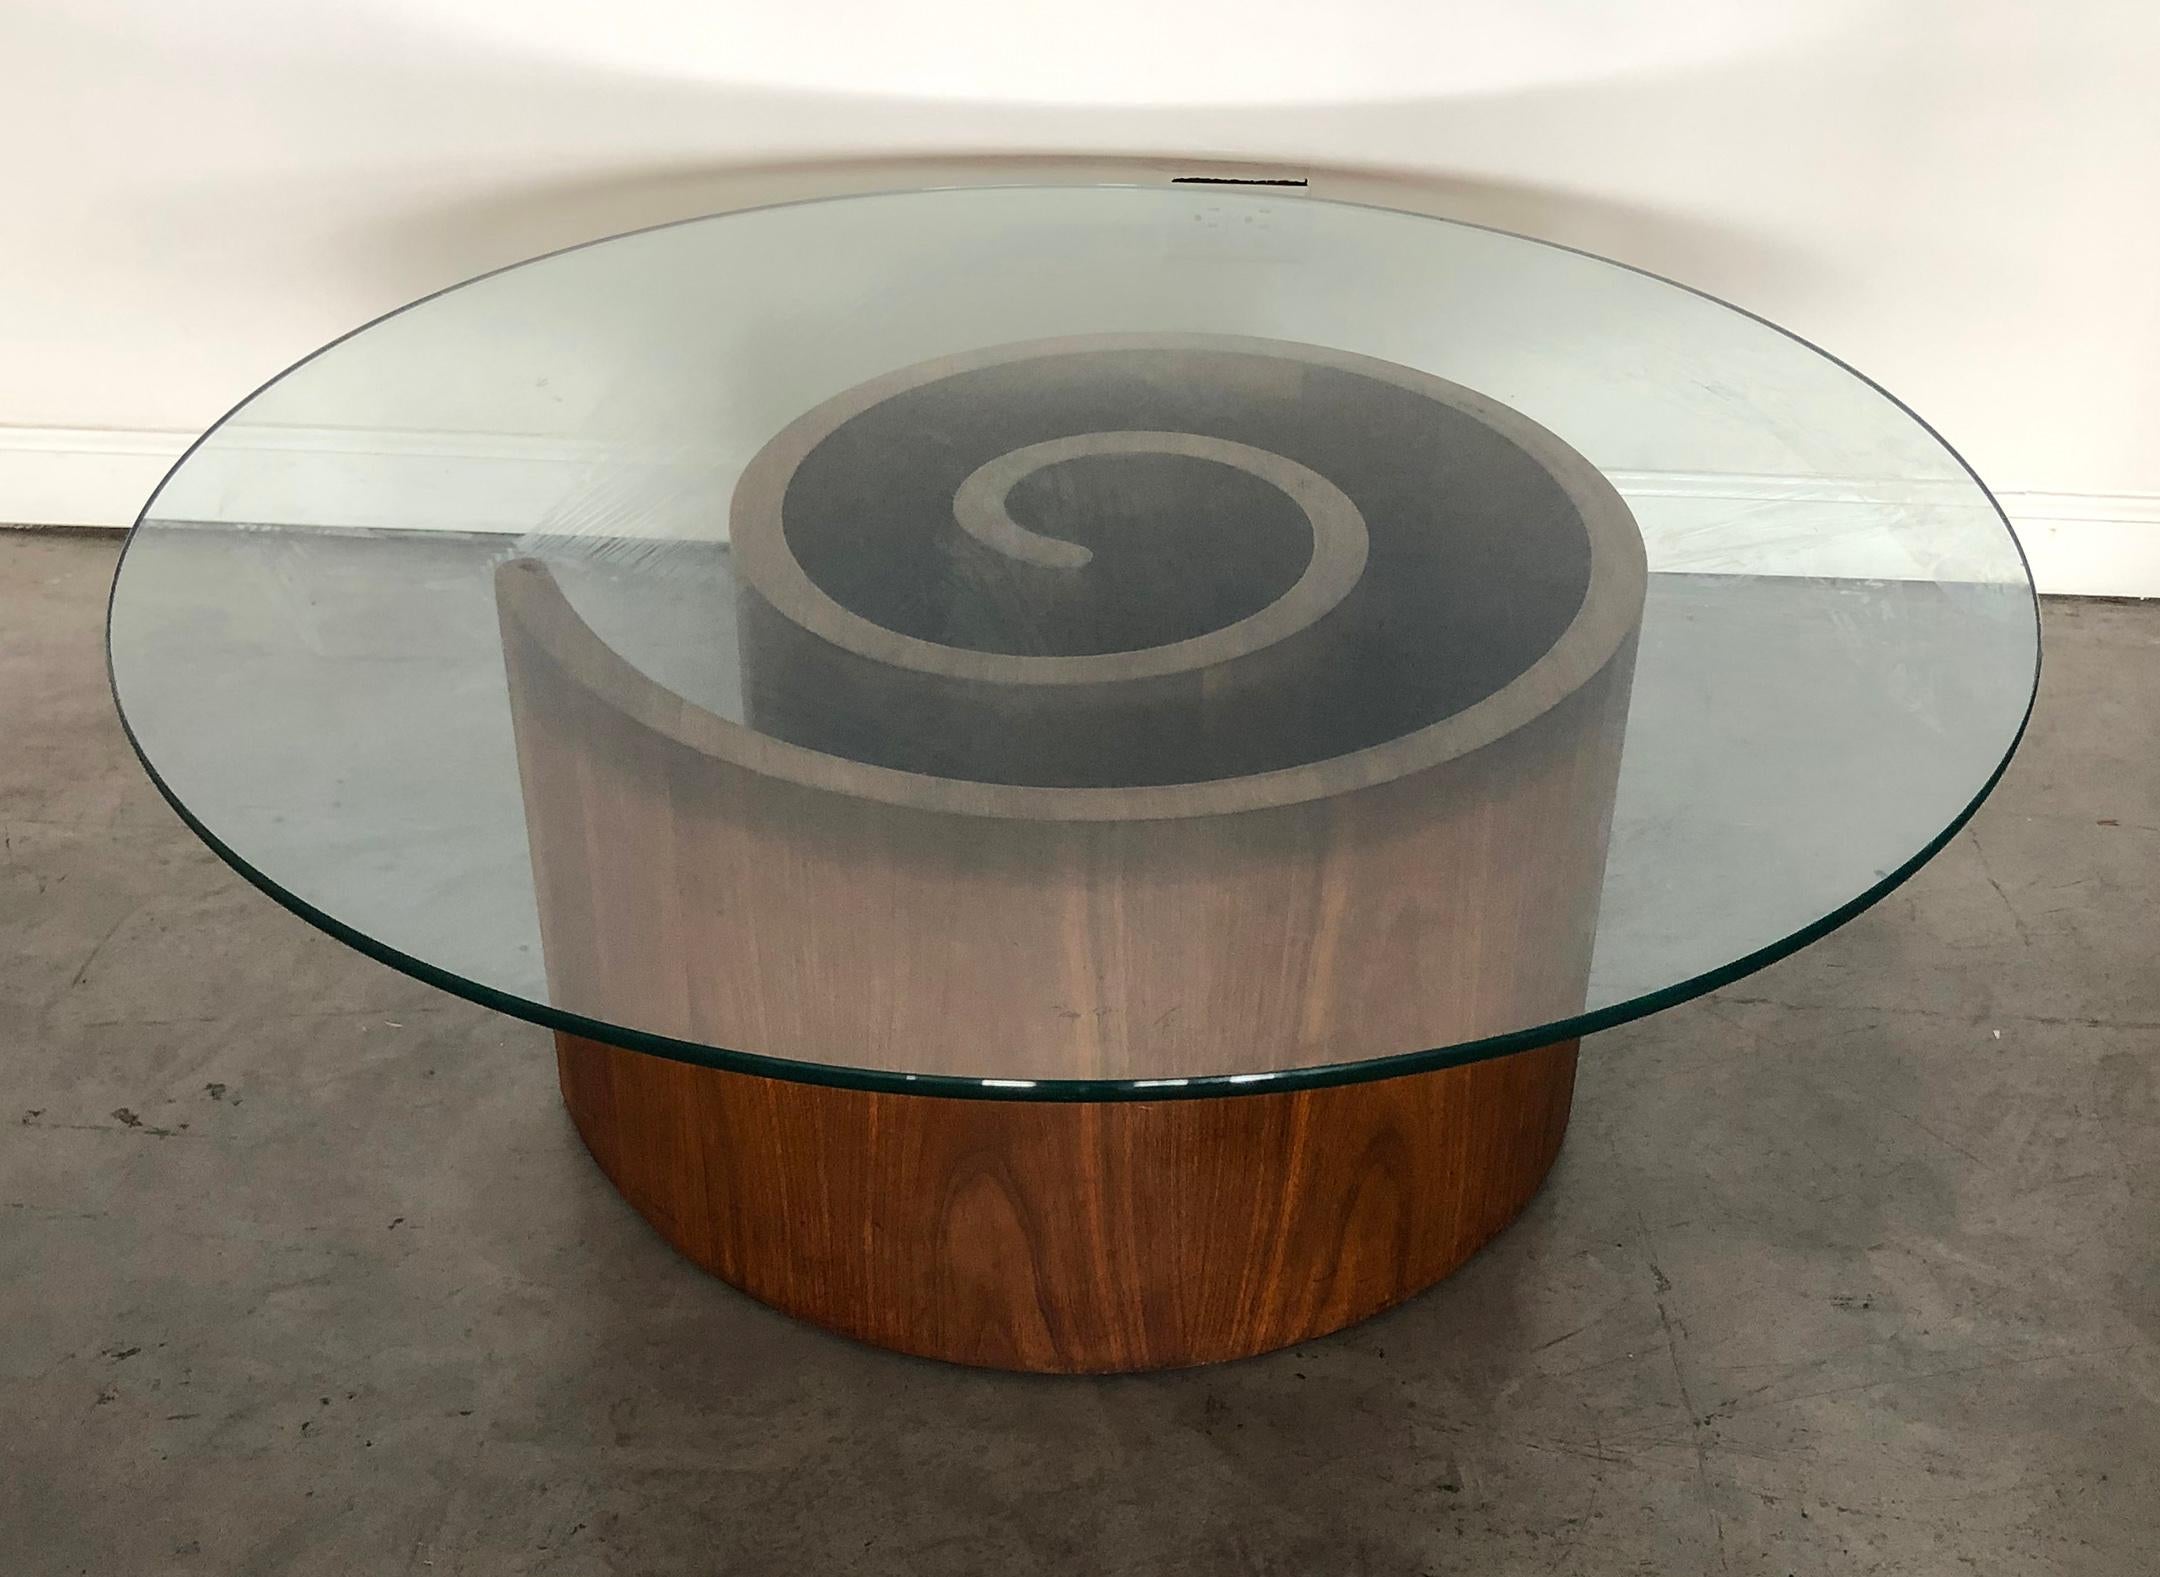 Available right now we have a stunning Vladimir Kagan Snail coffee table. This 